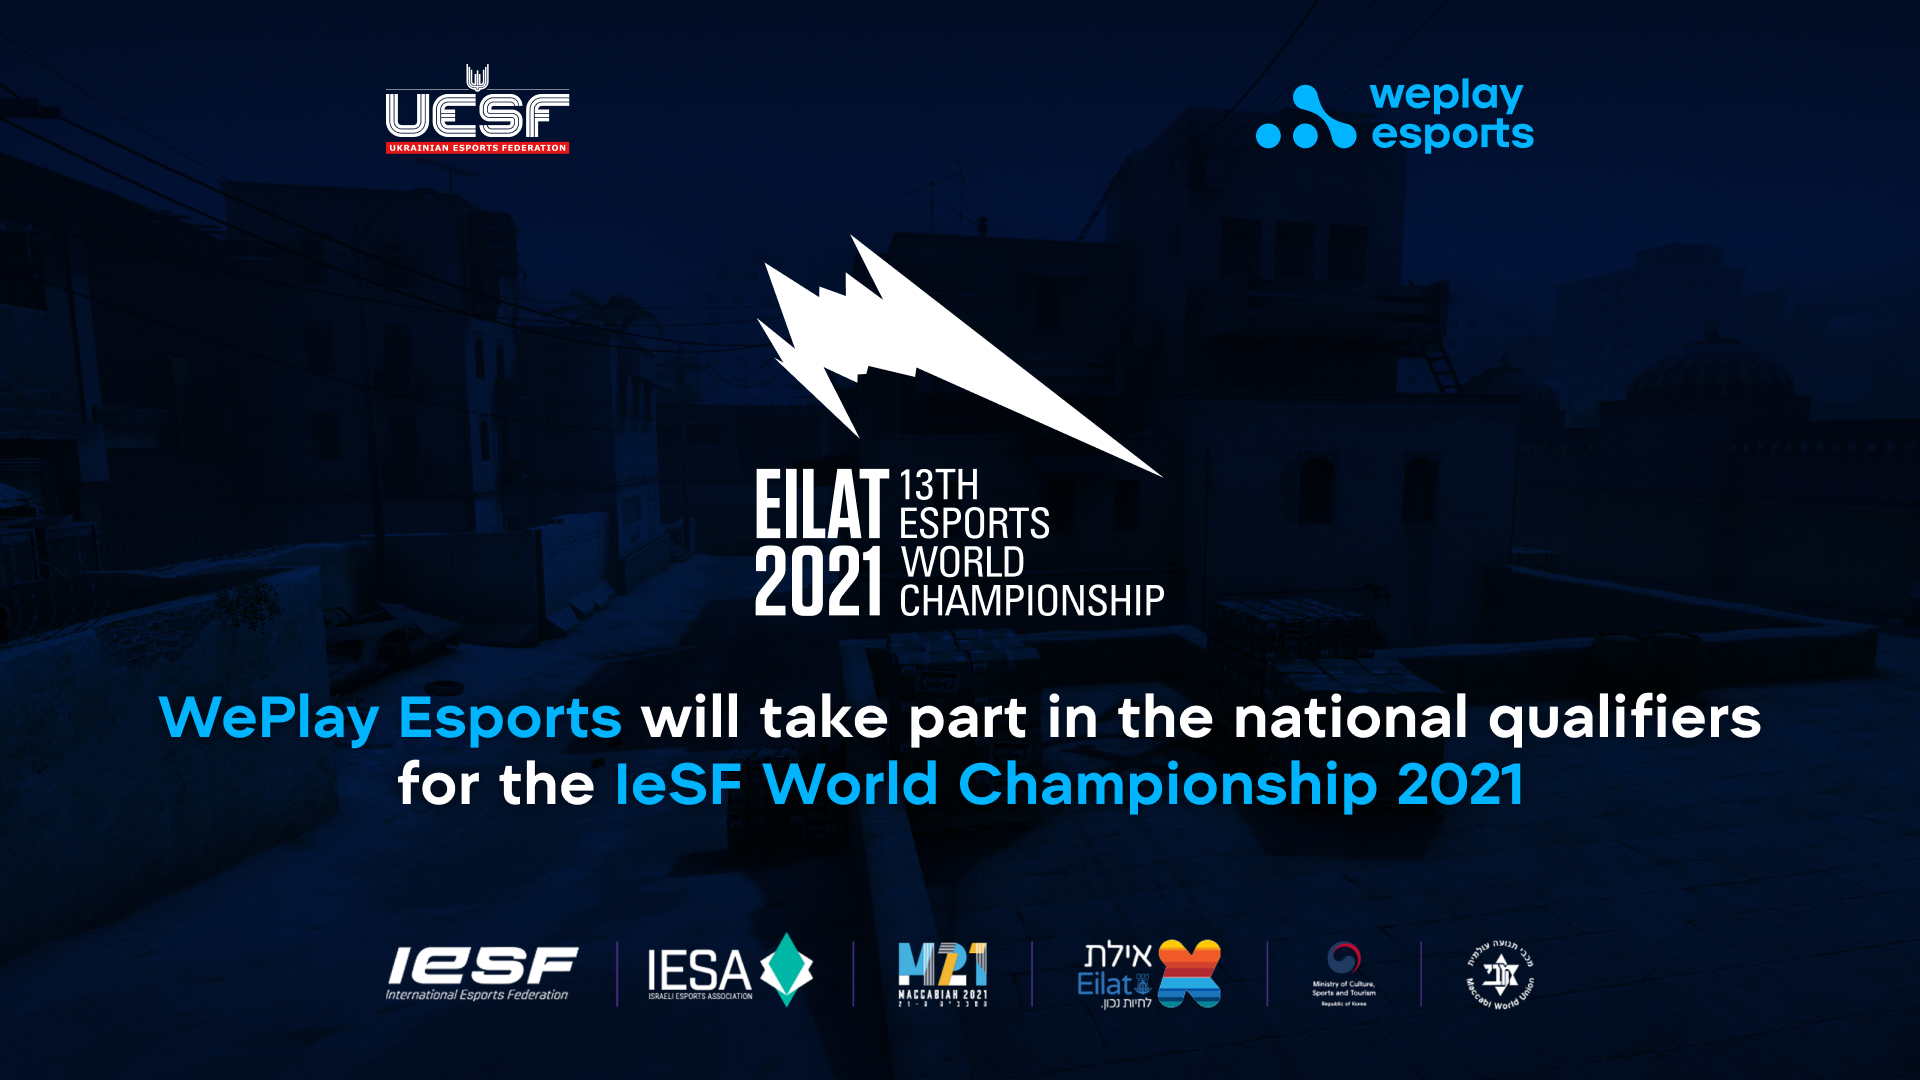 WePlay Esports will take part in organizing the national qualifiers for